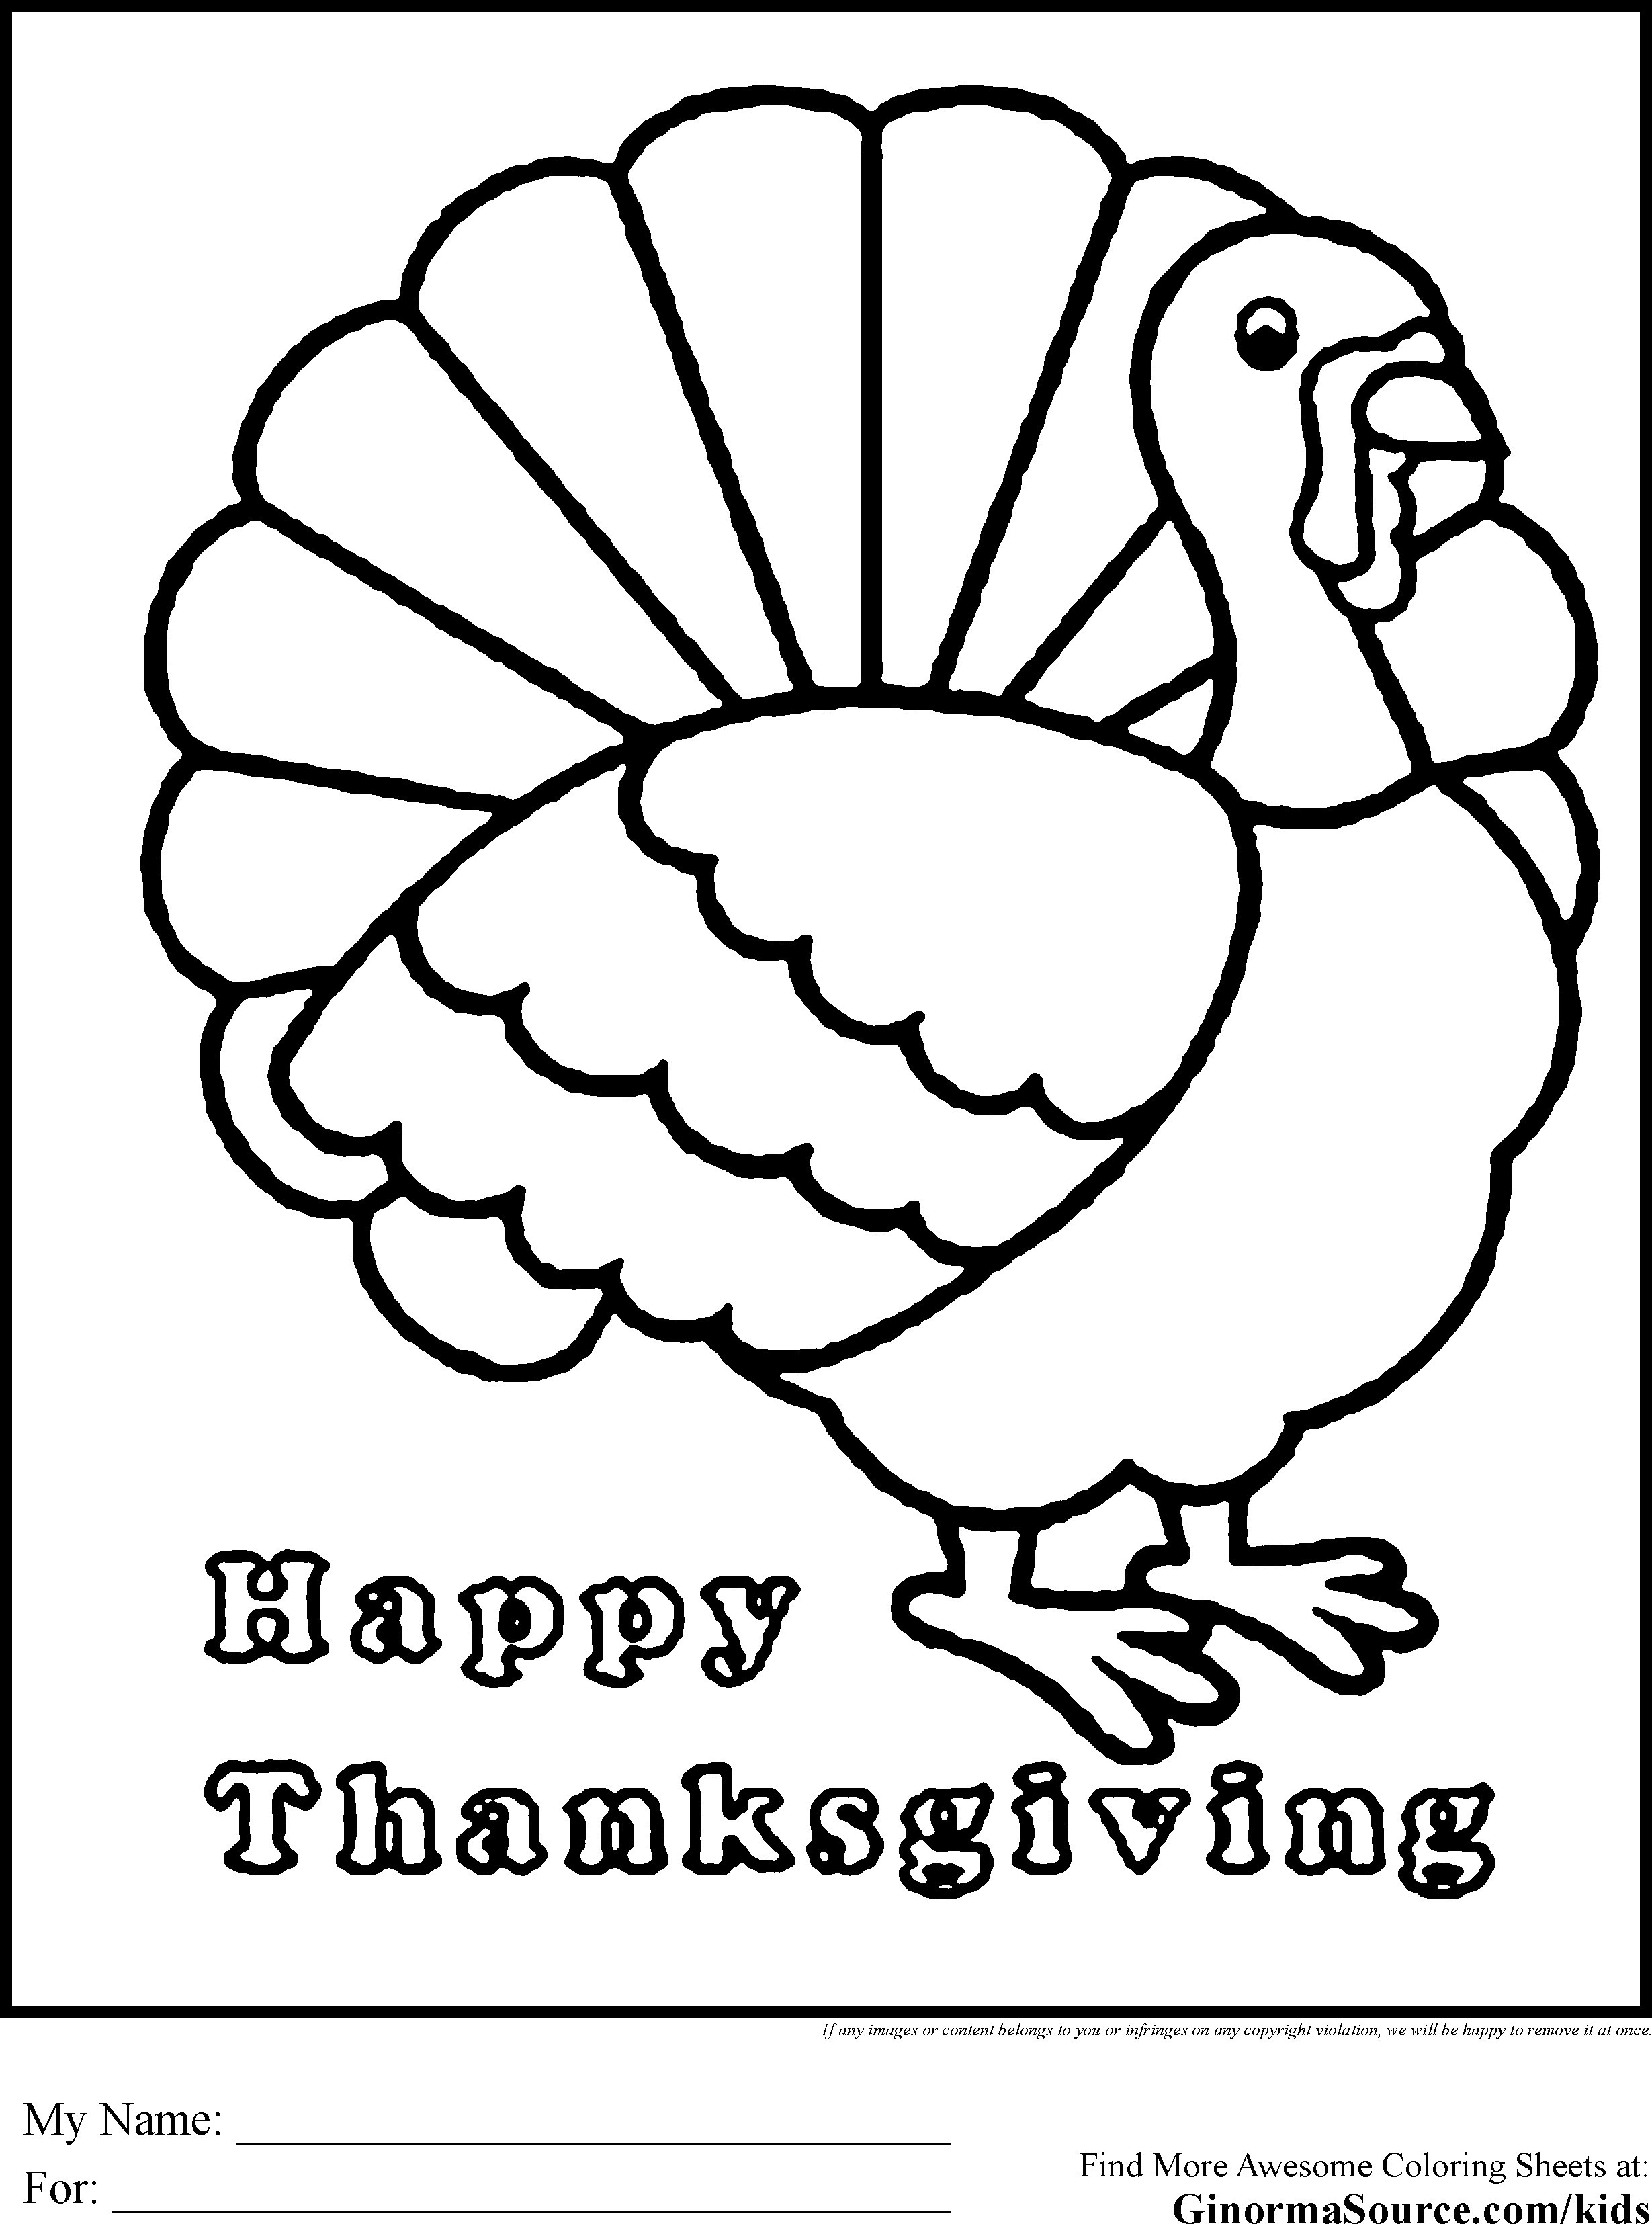 Turkey Outline Coloring Page Lovely Turkey to Color Turkey Outline Coloring Page Lovely Turkey to